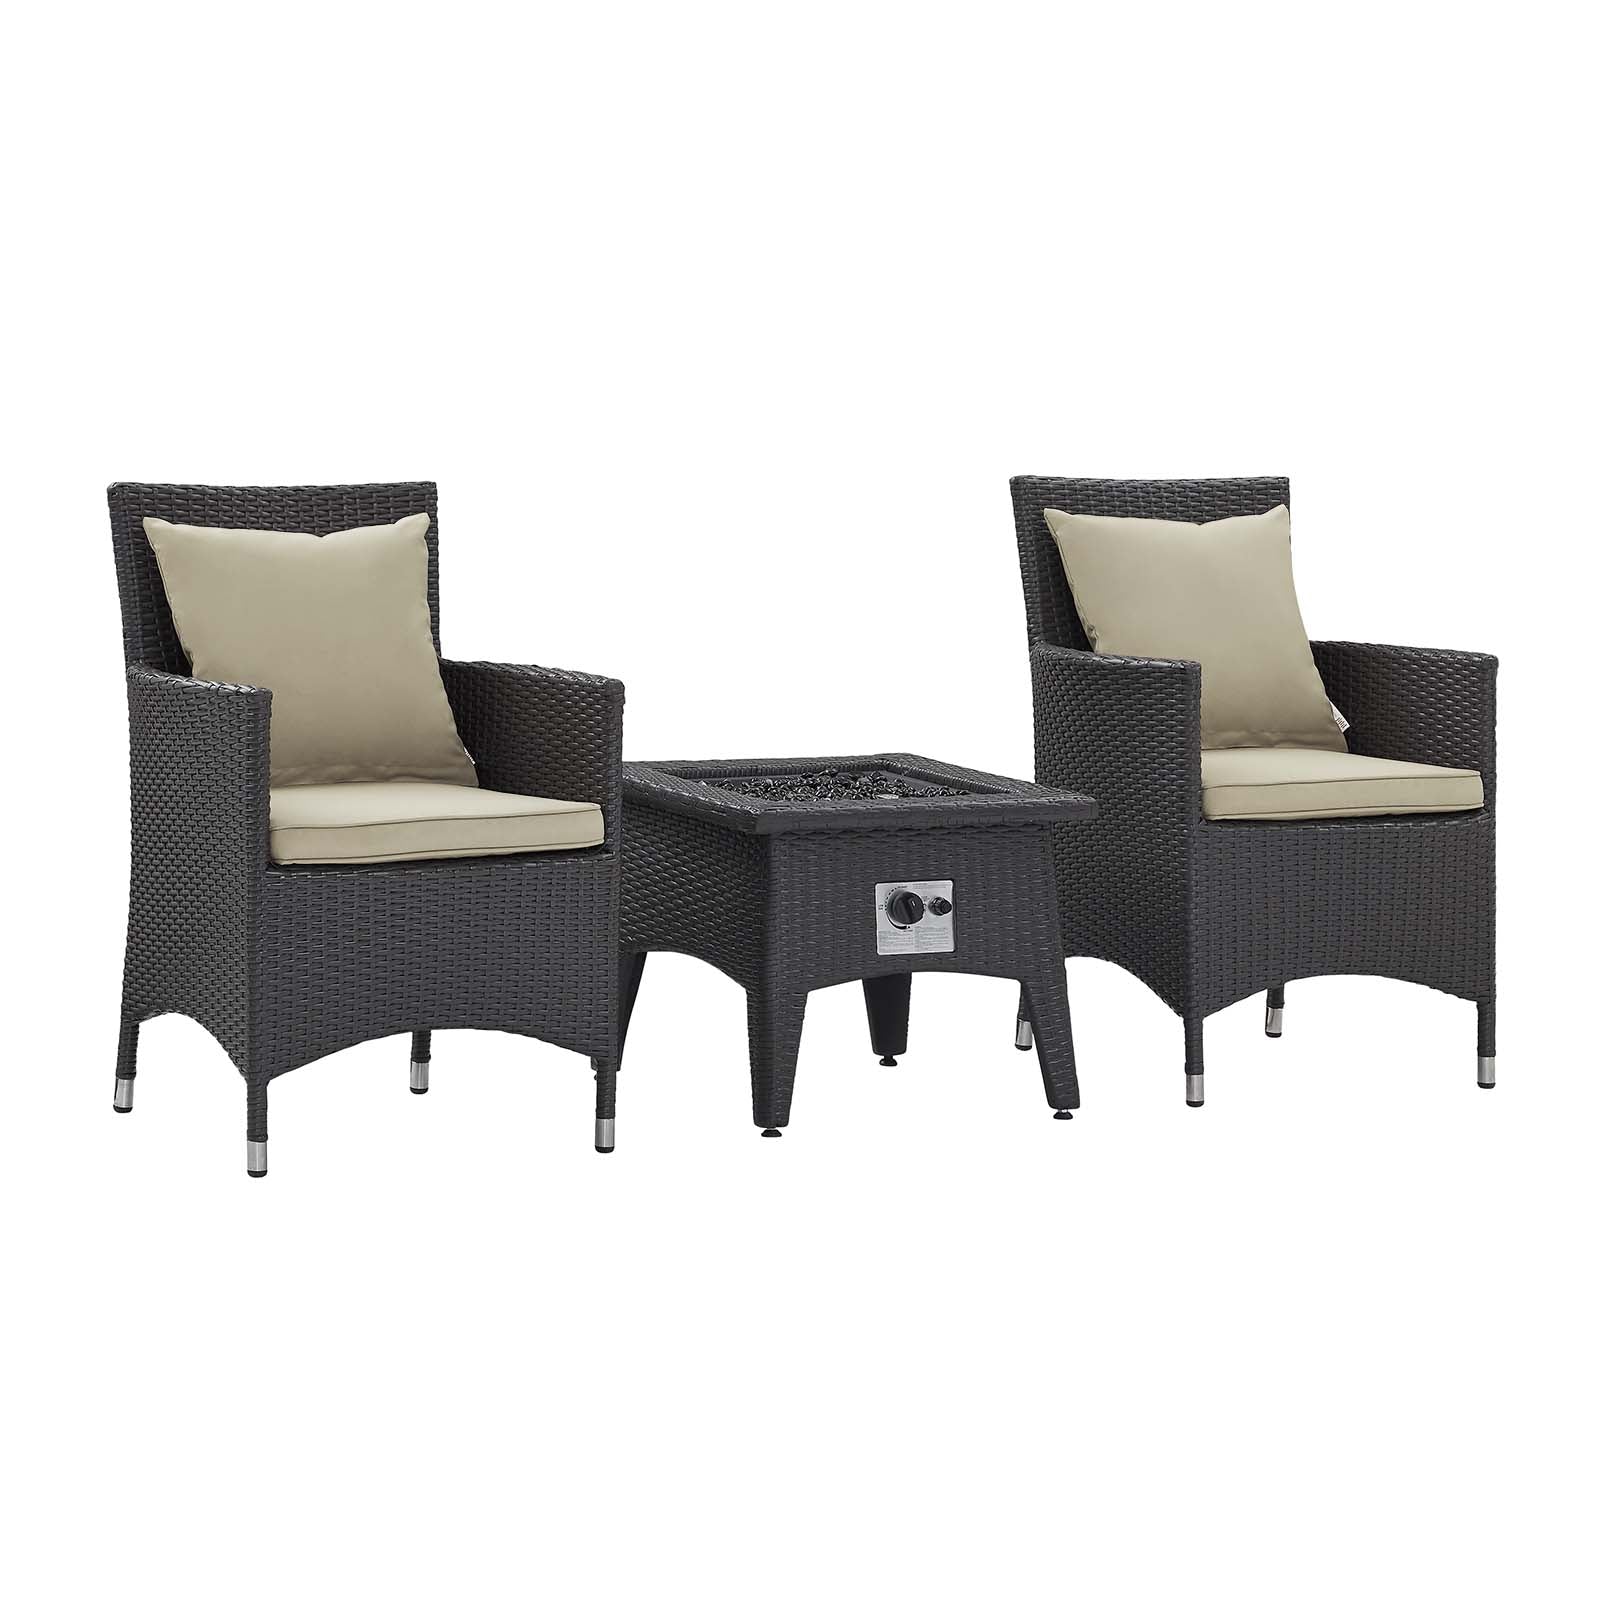 Modway Outdoor Dining Sets - Convene 3 Piece Set Outdoor Patio with Fire Pit Espresso Beige 71"